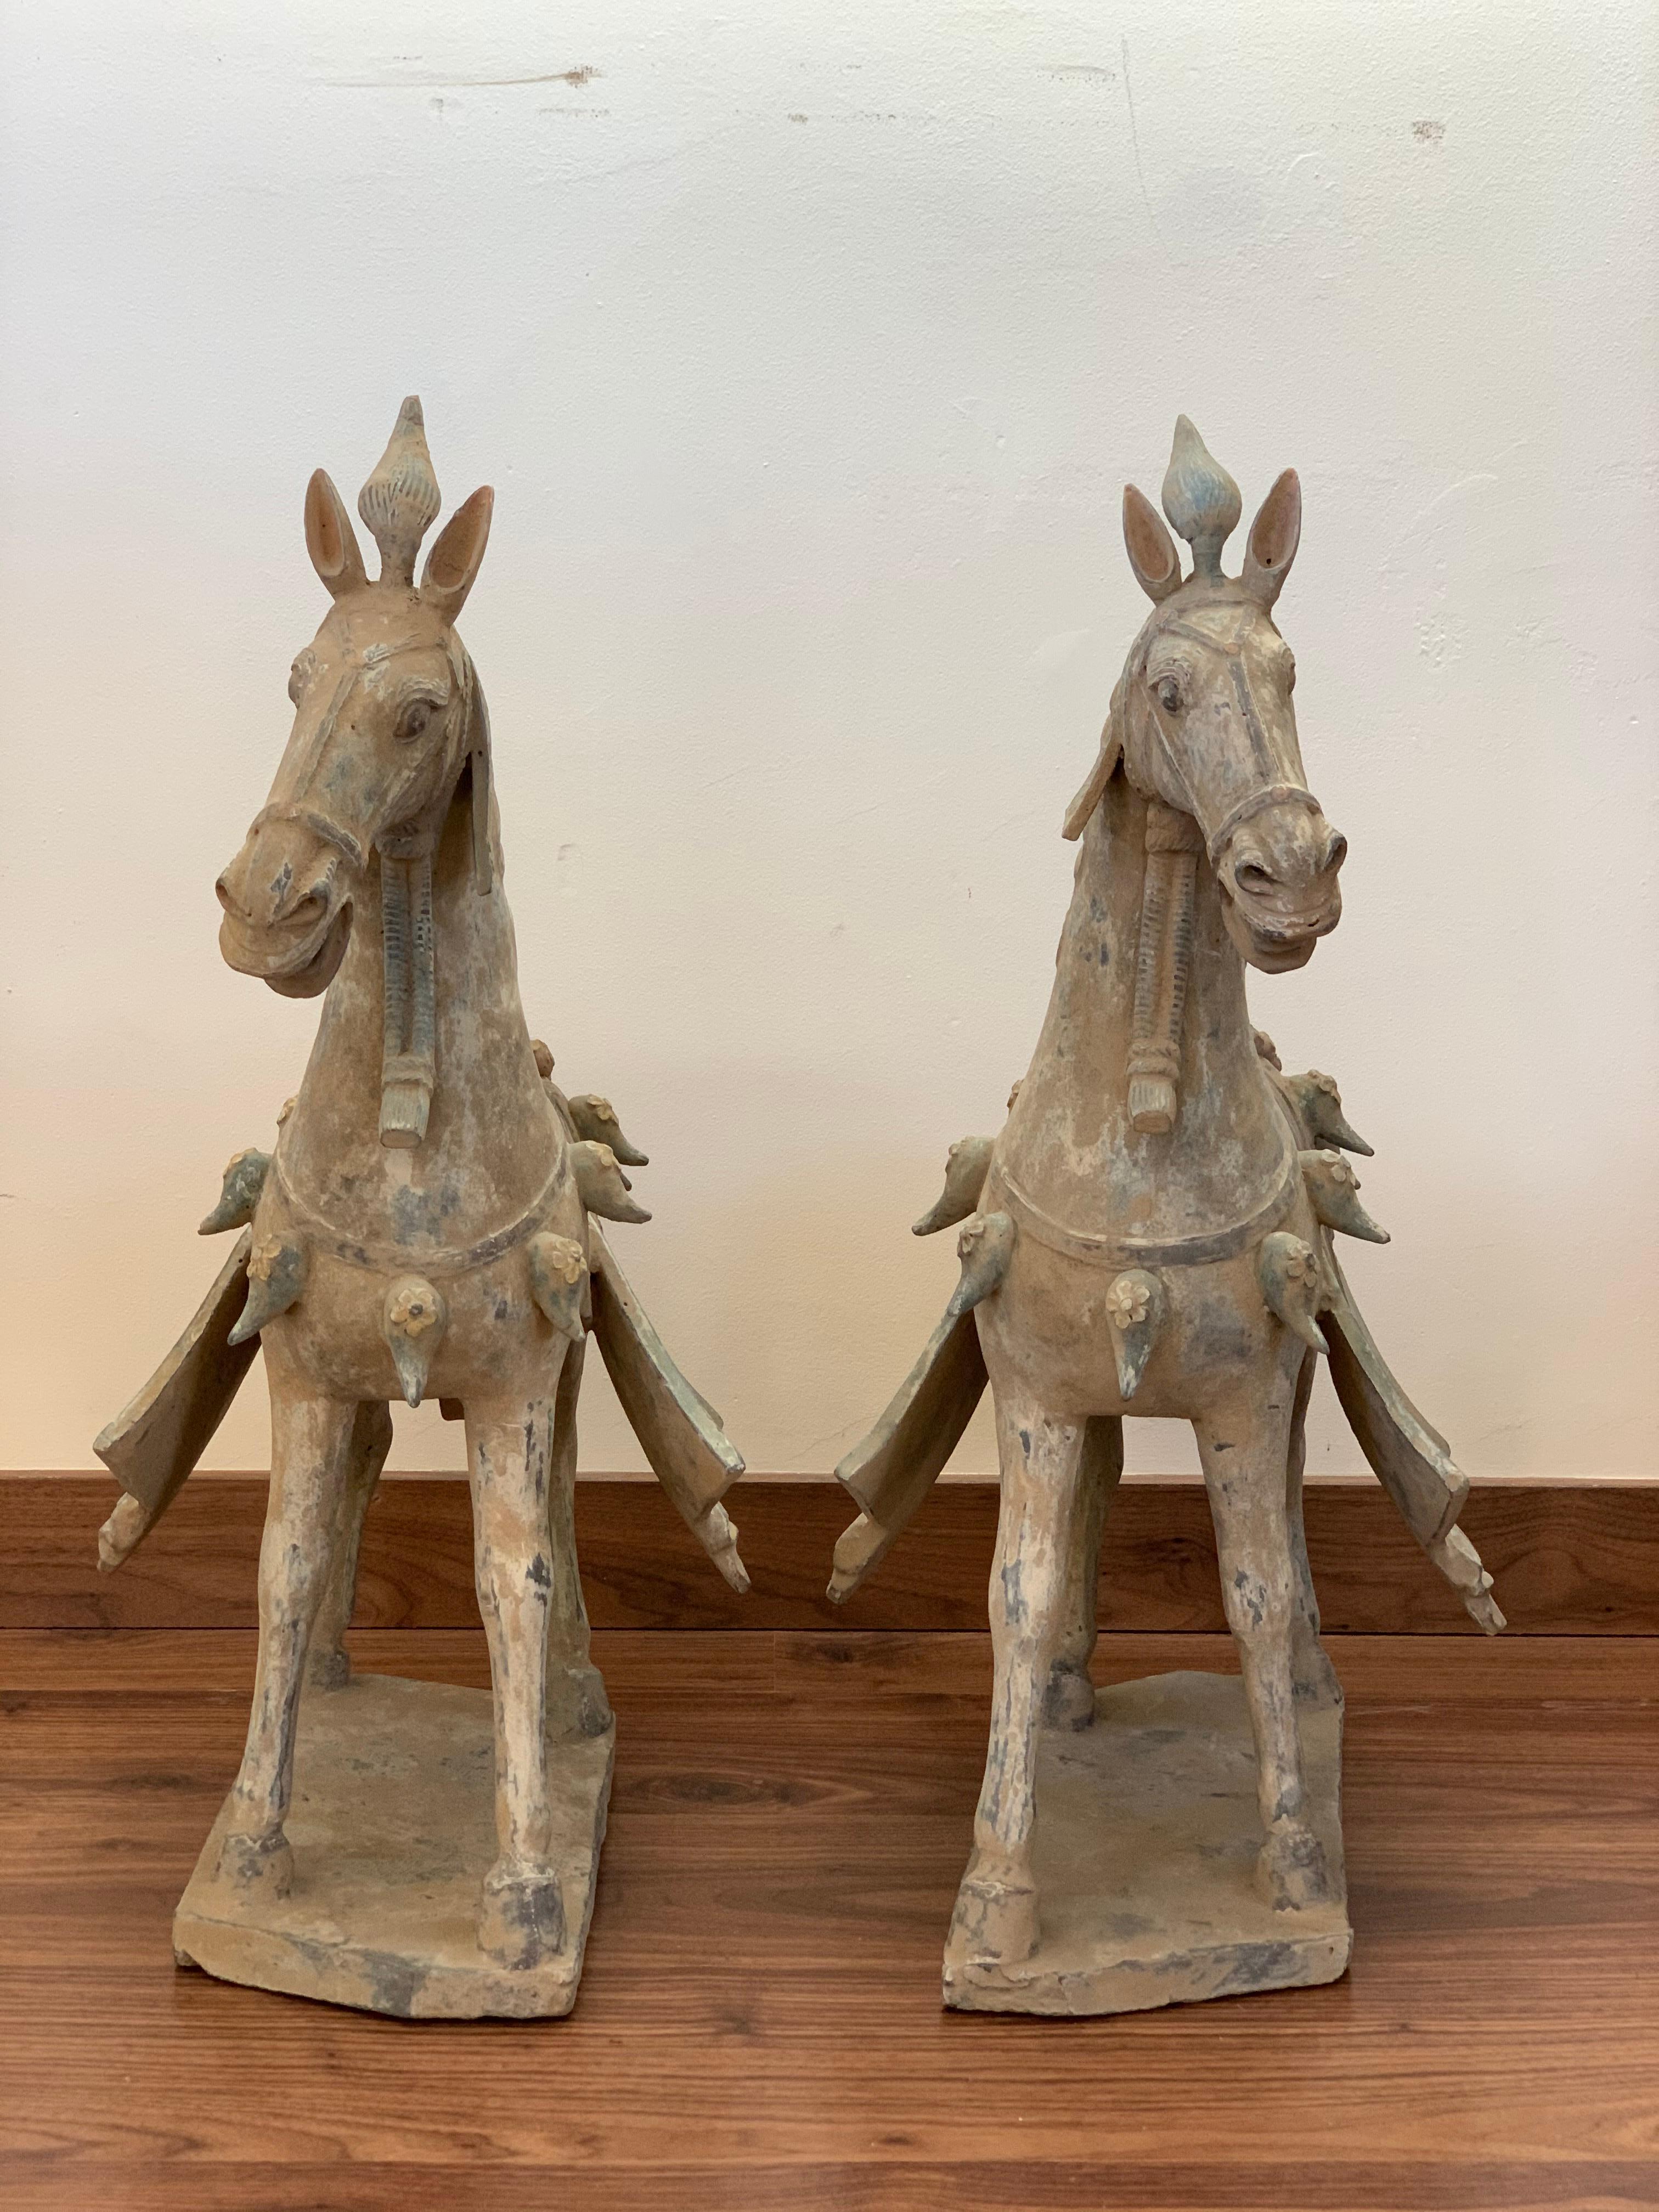 Han  Northern Wei Dynasty Terracotta Horses, TL Tested,  '386 AD-535 AD'